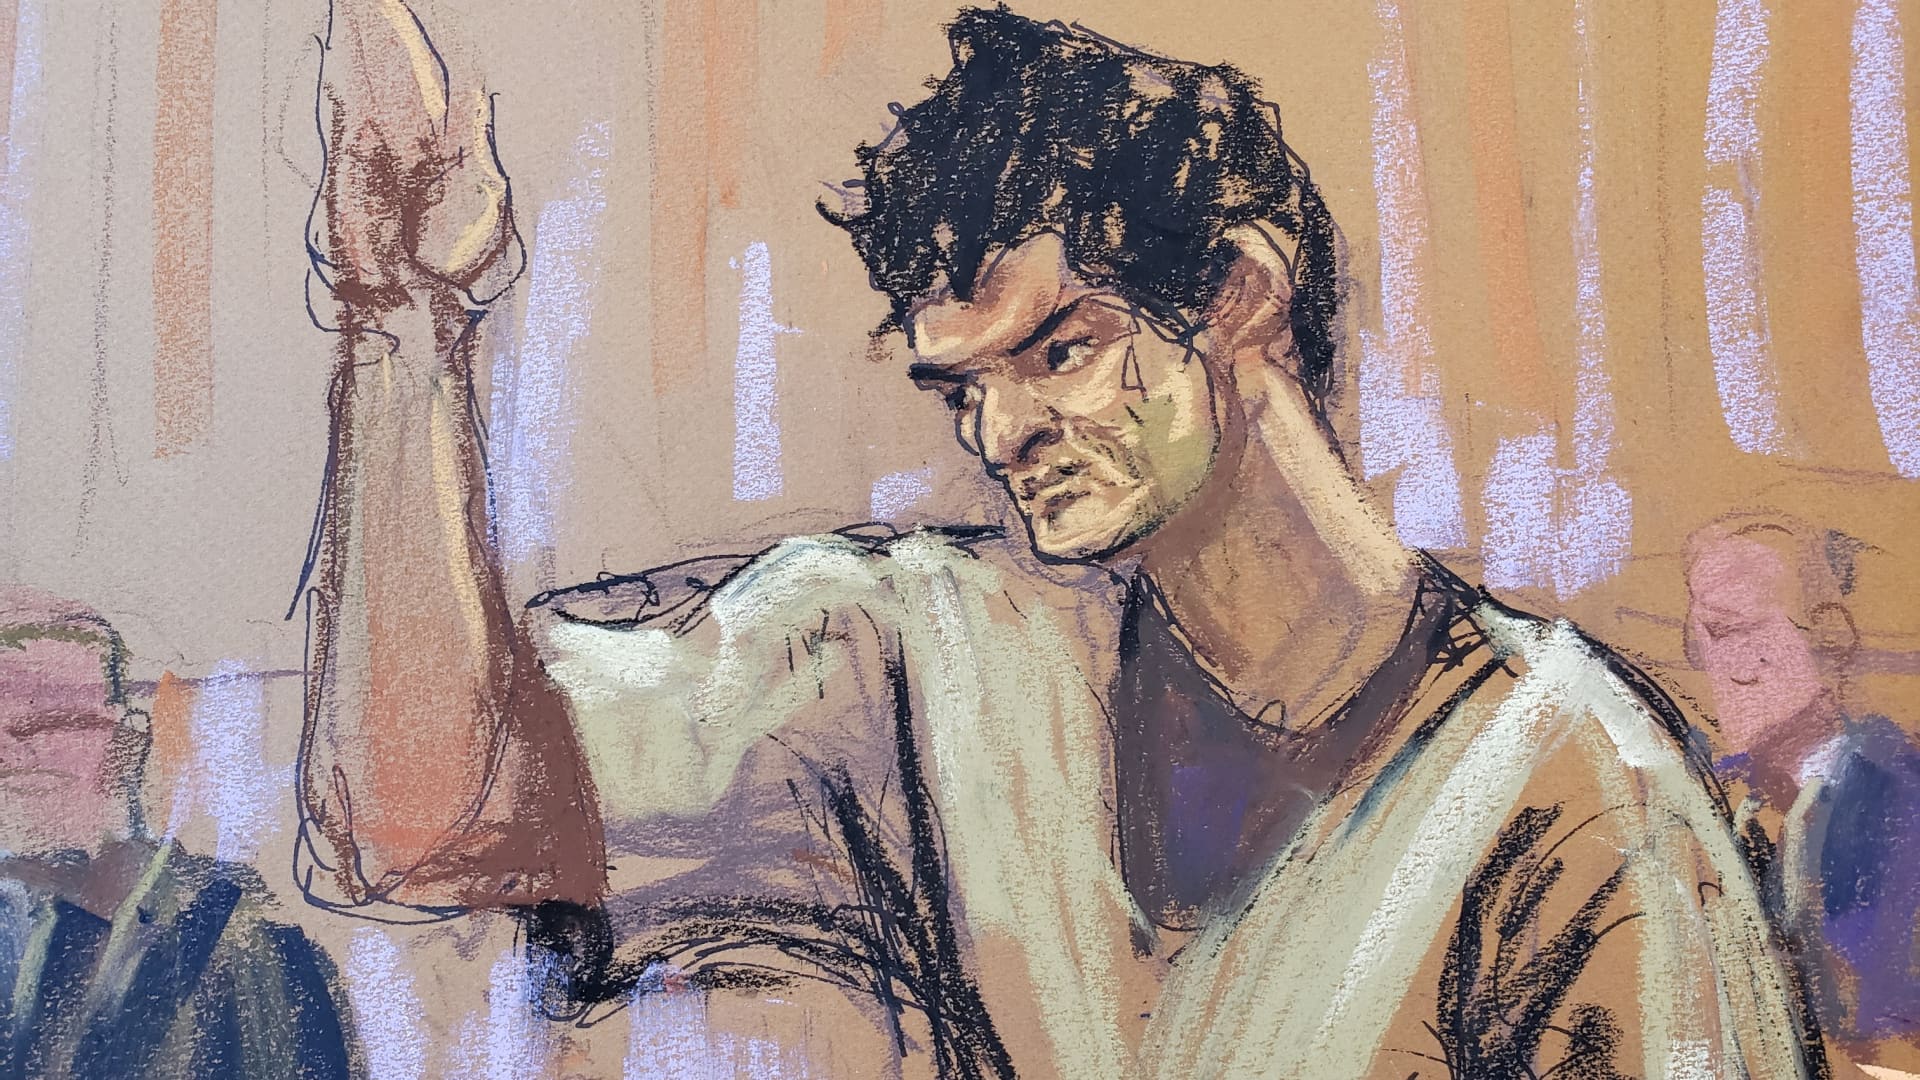 Sam Bankman-Fried, the jailed founder of bankrupt cryptocurrency exchange FTX, is sworn in as he appears in court for the first time since his November fraud conviction, at a courthouse in New York, U.S., February 21, 2024 in this courtroom sketch. 